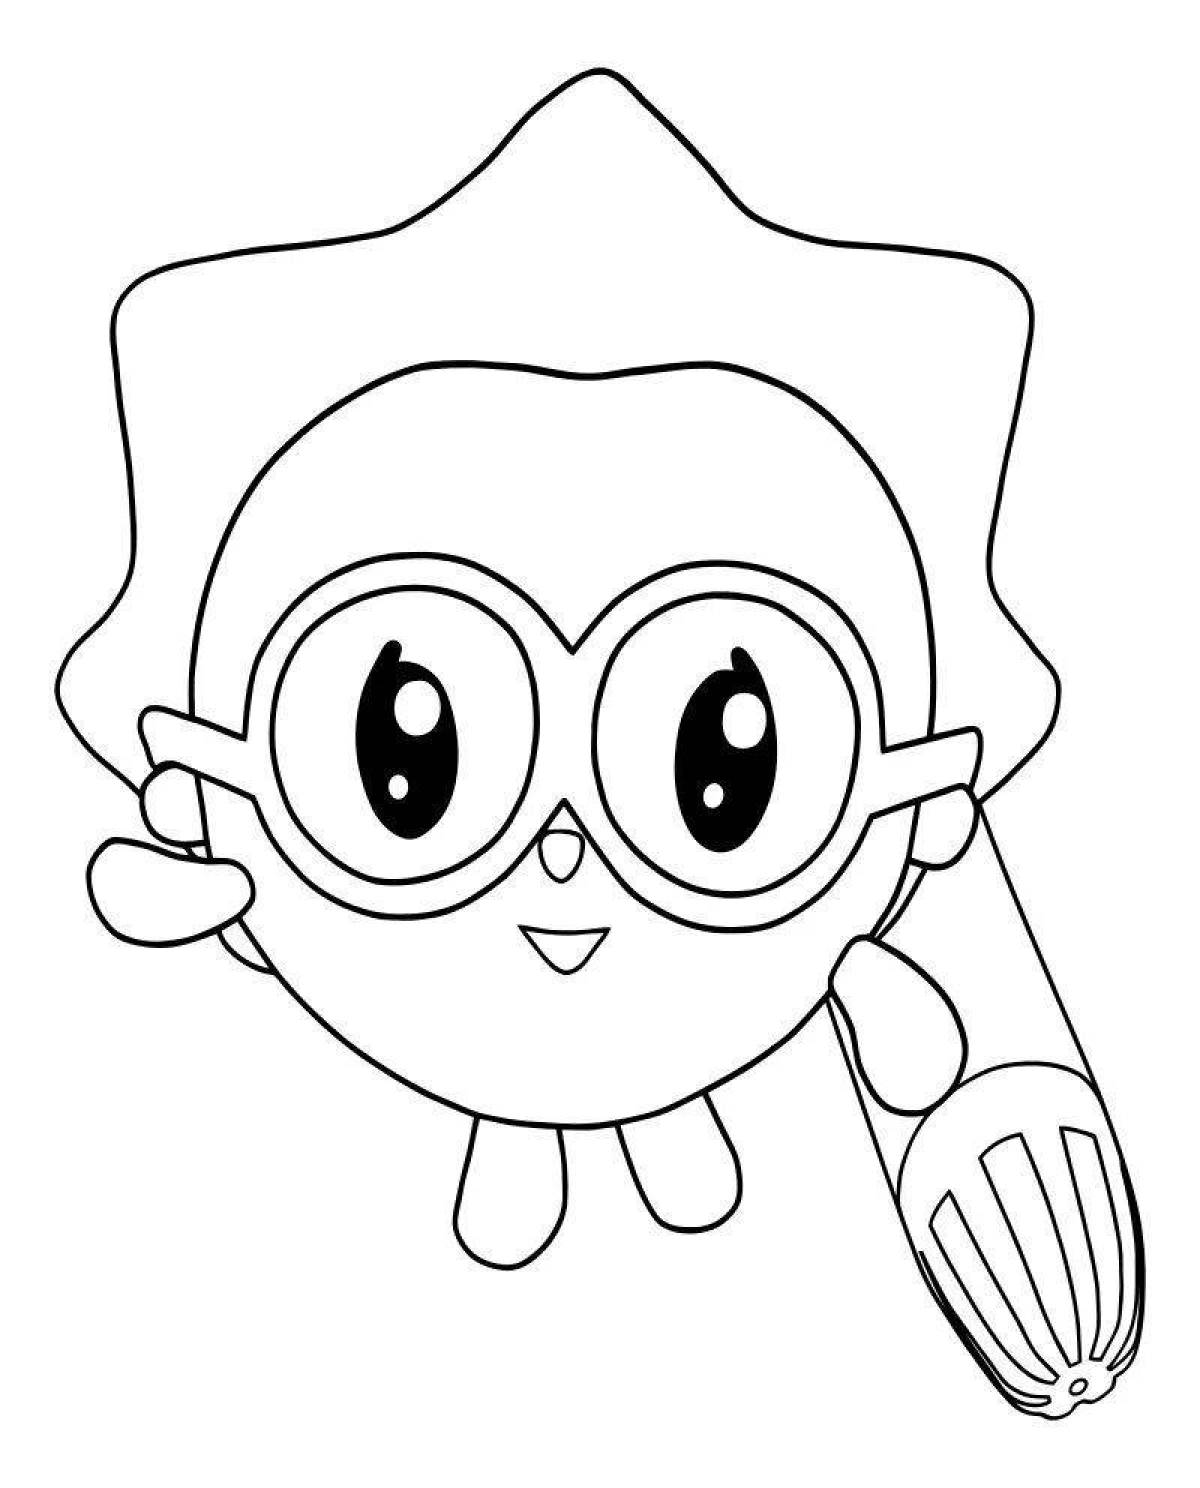 Amazing coloring pages for kids clock